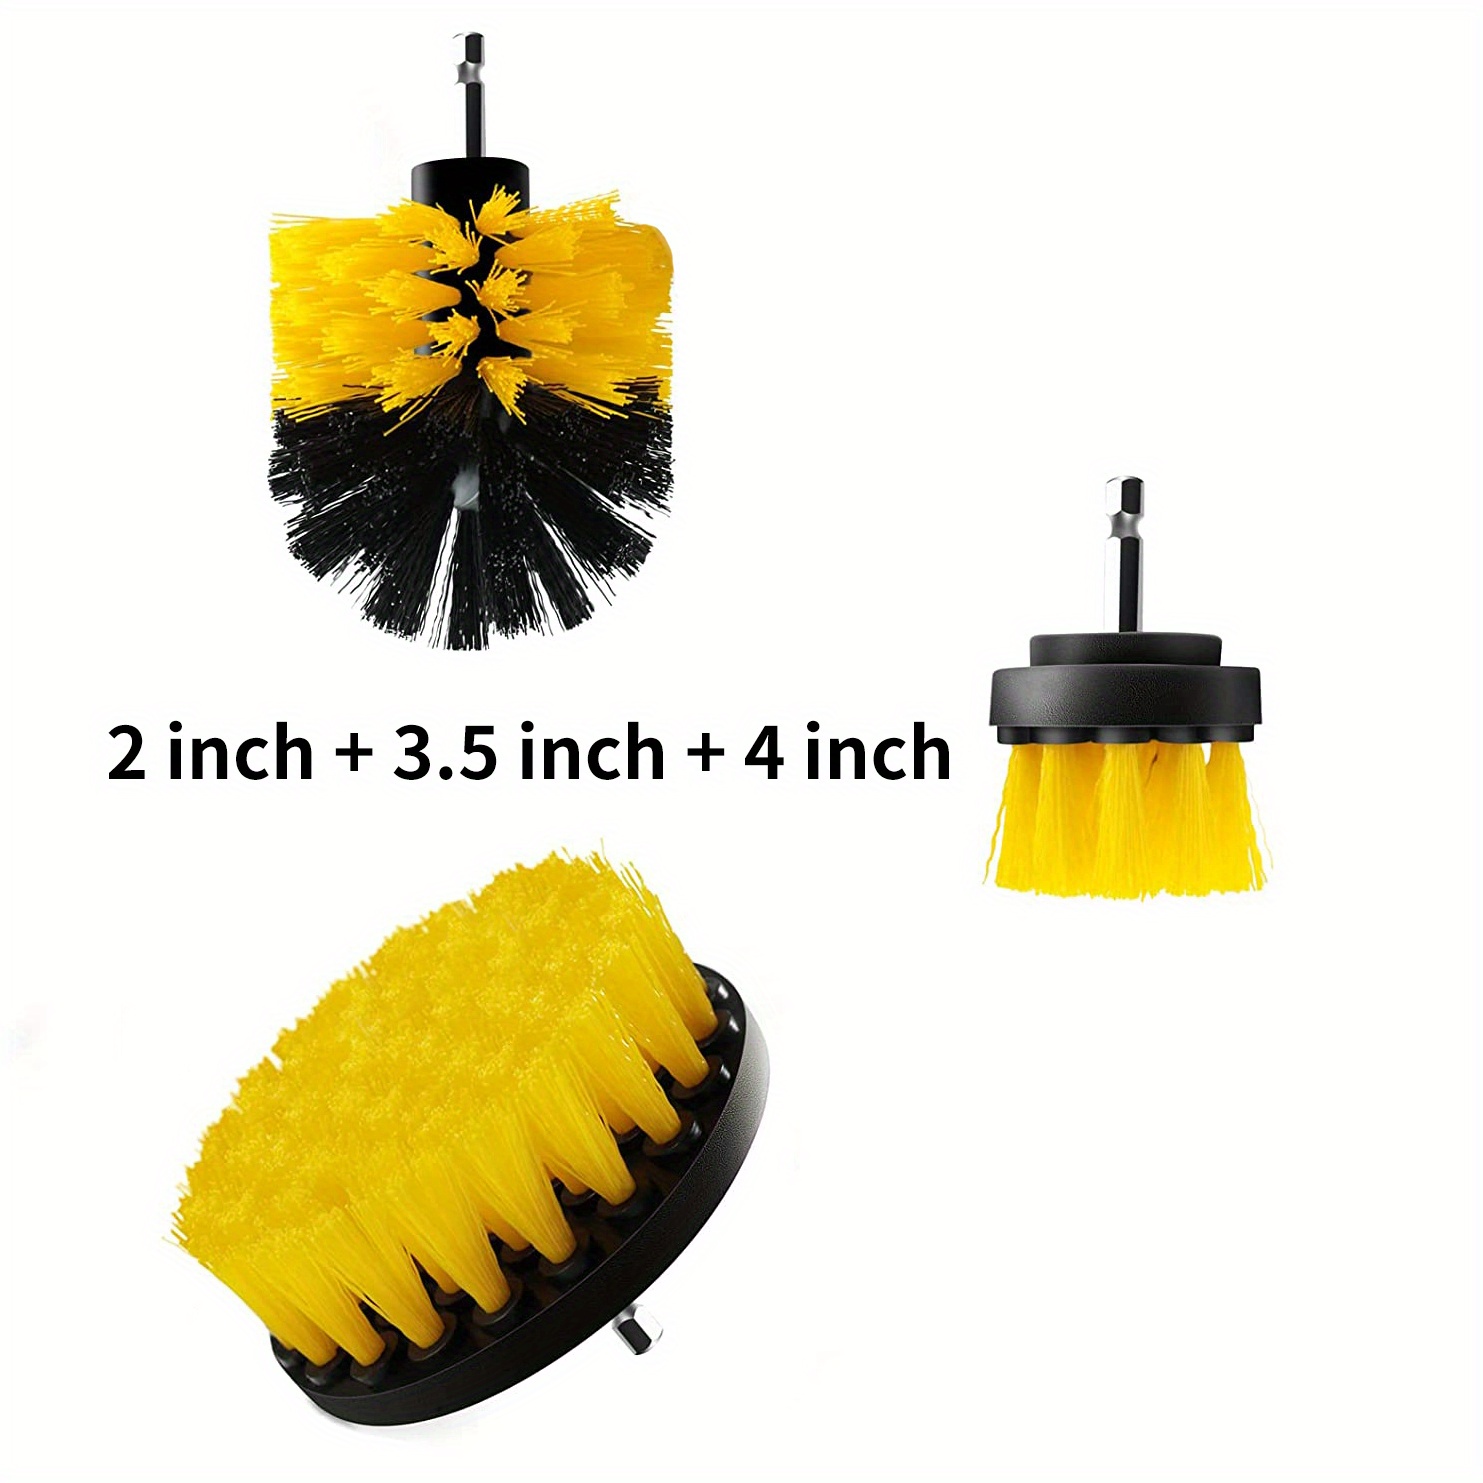 3pcs Drill Brush Set, Power Scrubber Wash Cleaning Brushes Tool